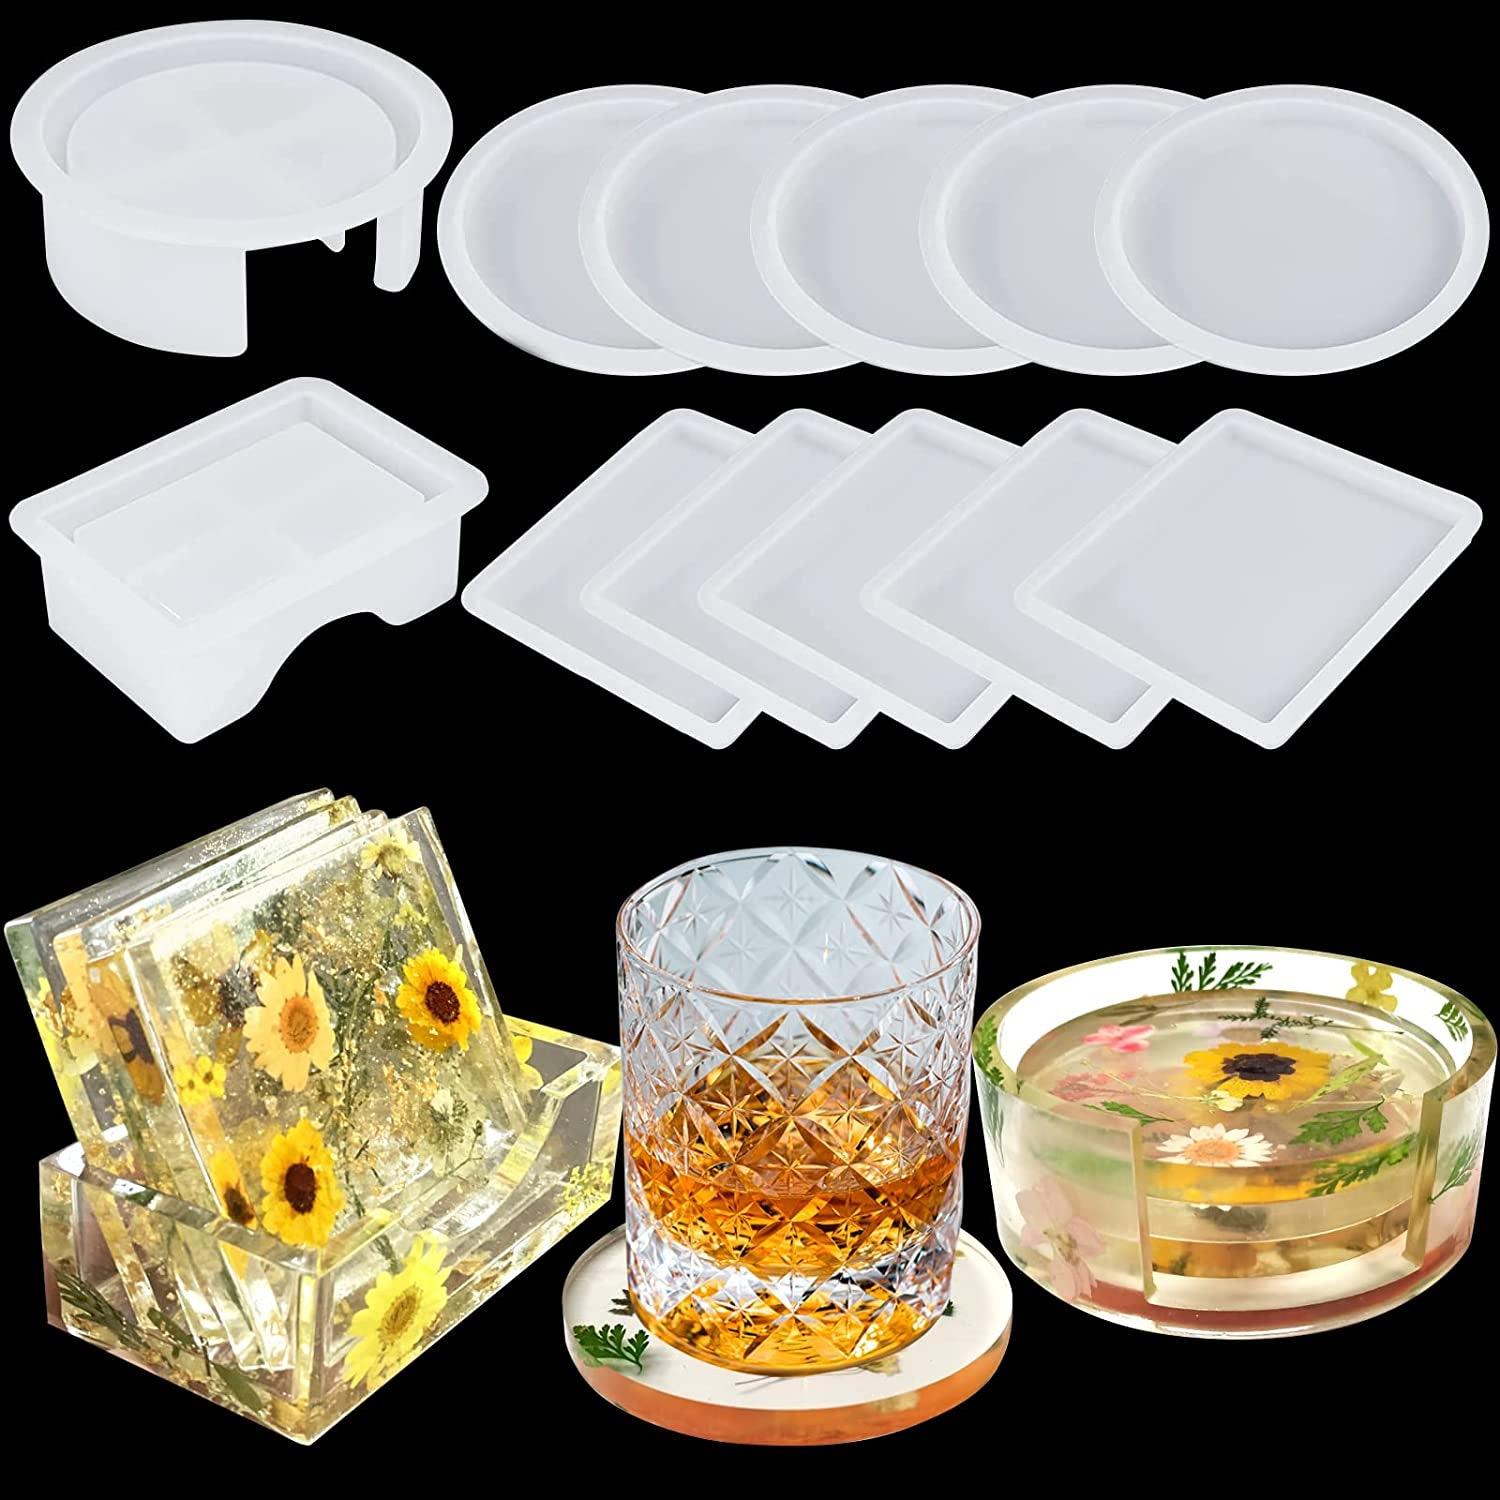 LET'S RESIN 18 Pcs Coaster Resin Molds Silicone, Coaster Molds